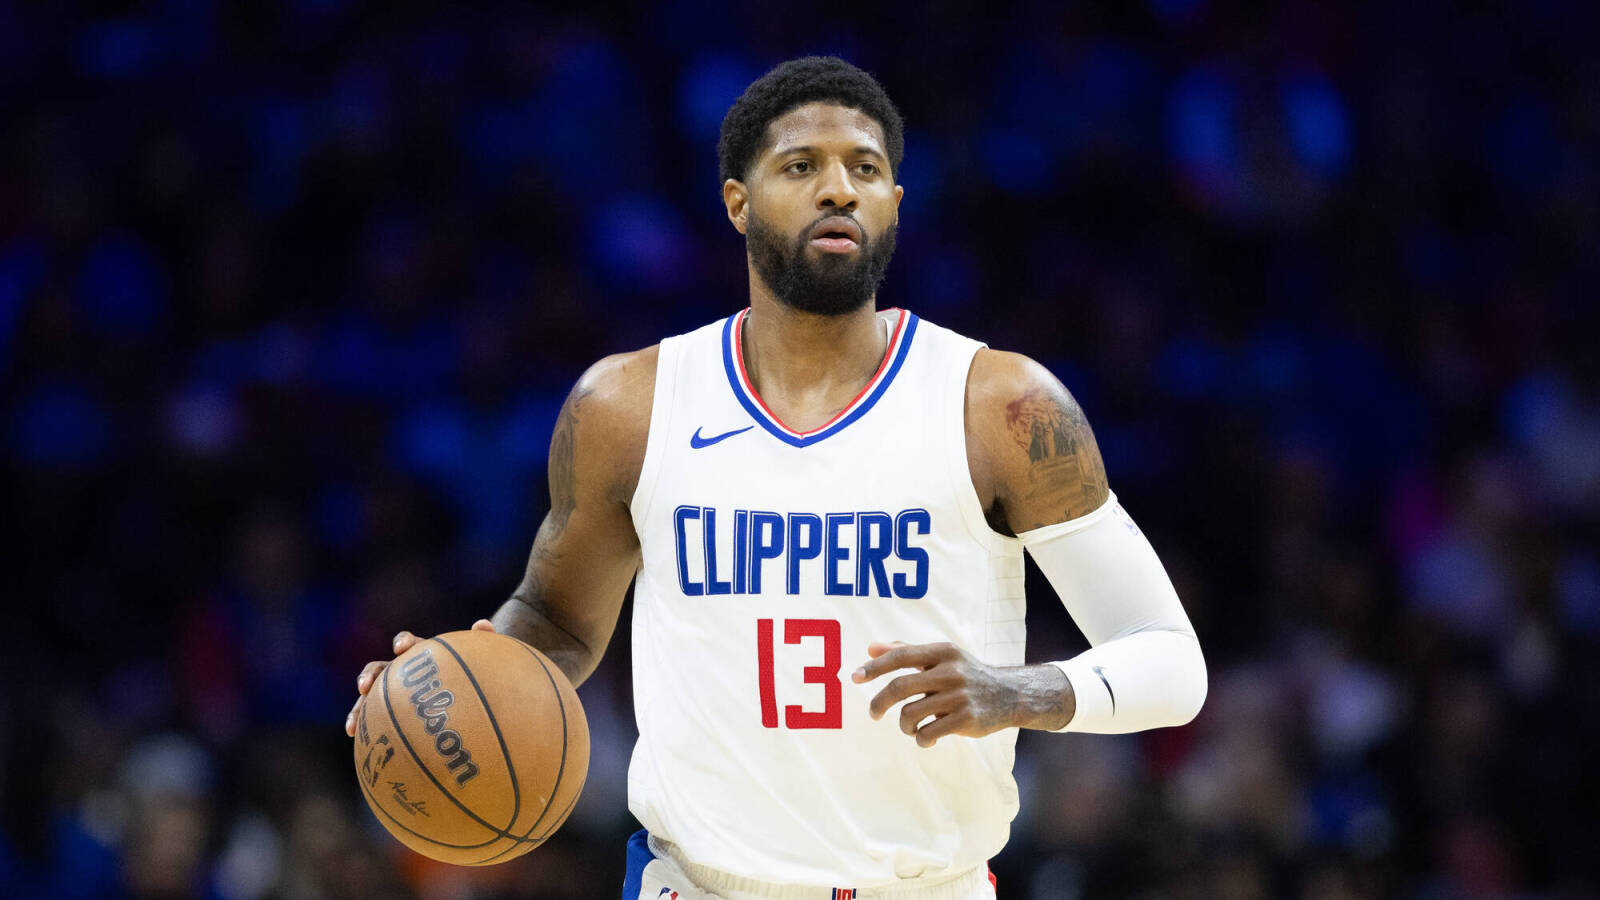 Report: Clippers expected to ‘eventually’ pay up, give Paul George new contract